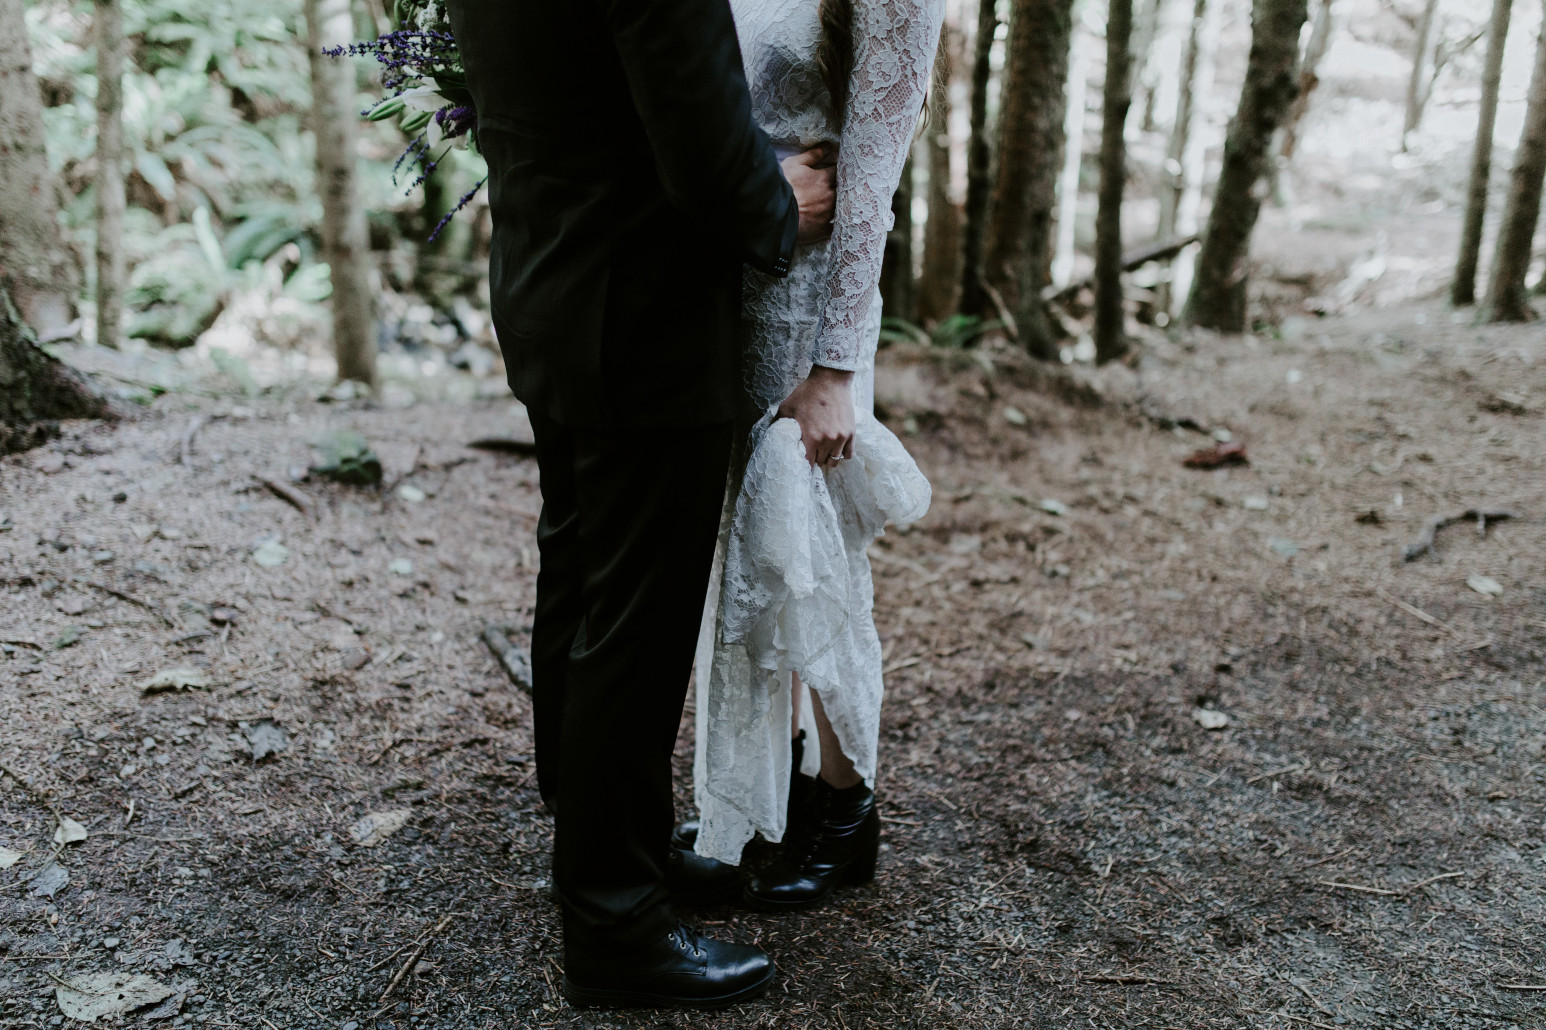 Vlad and Nicole hug at Cannon Beach, OR. Elopement wedding photography at Cannon Beach by Sienna Plus Josh.